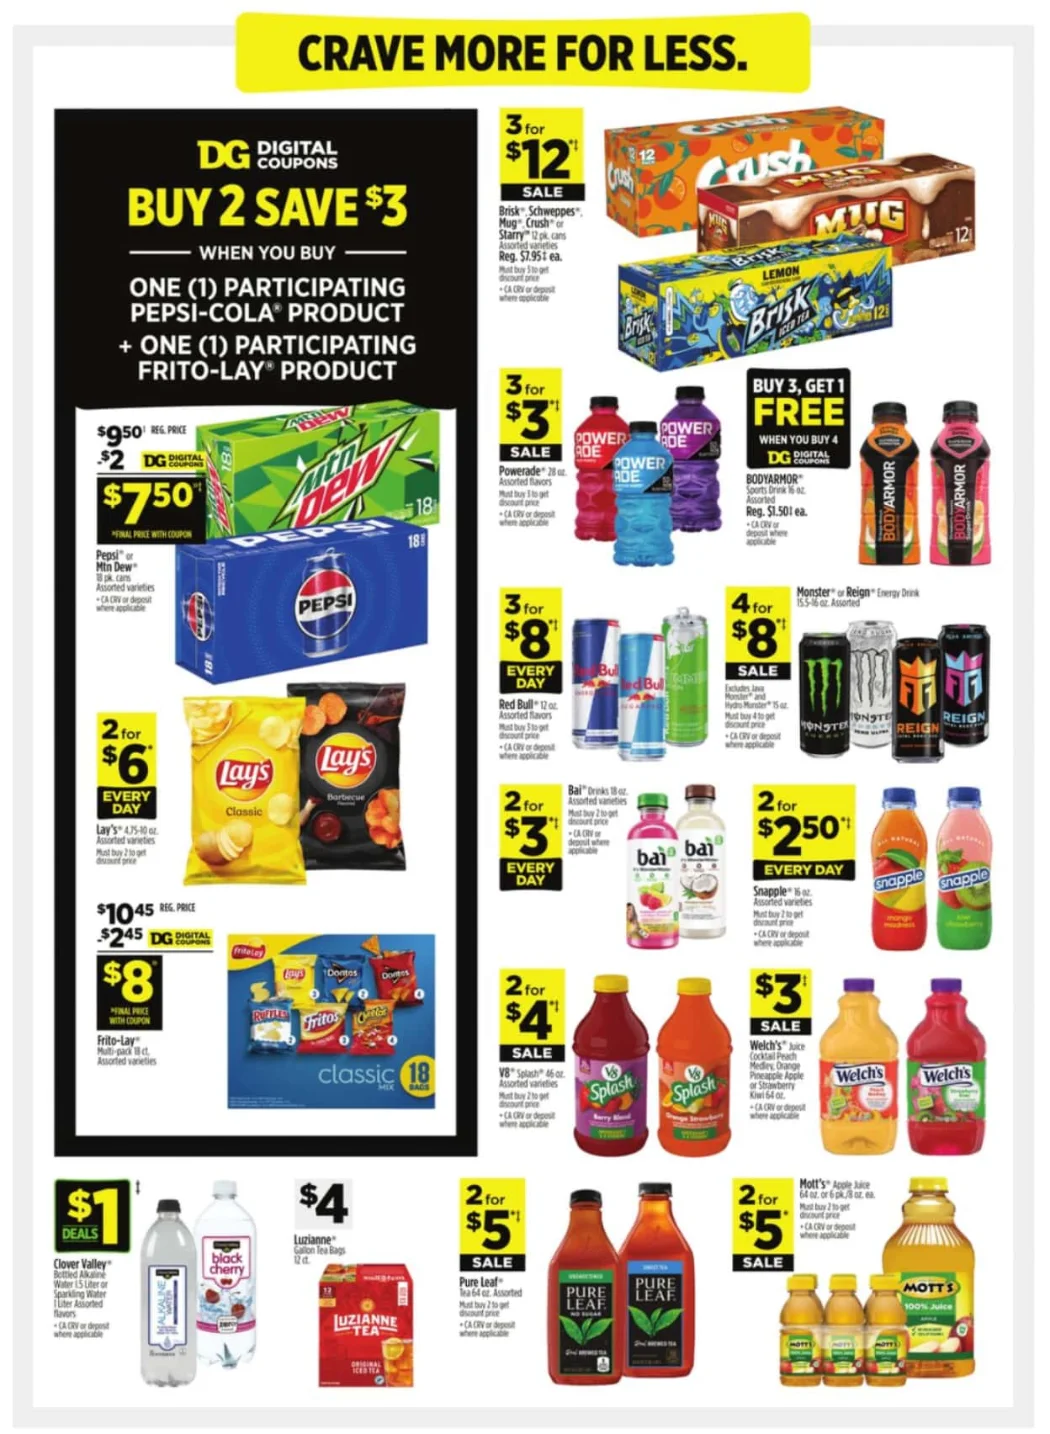 Dollar General July 2024 Weekly Sales, Deals, Discounts and Digital Coupons.